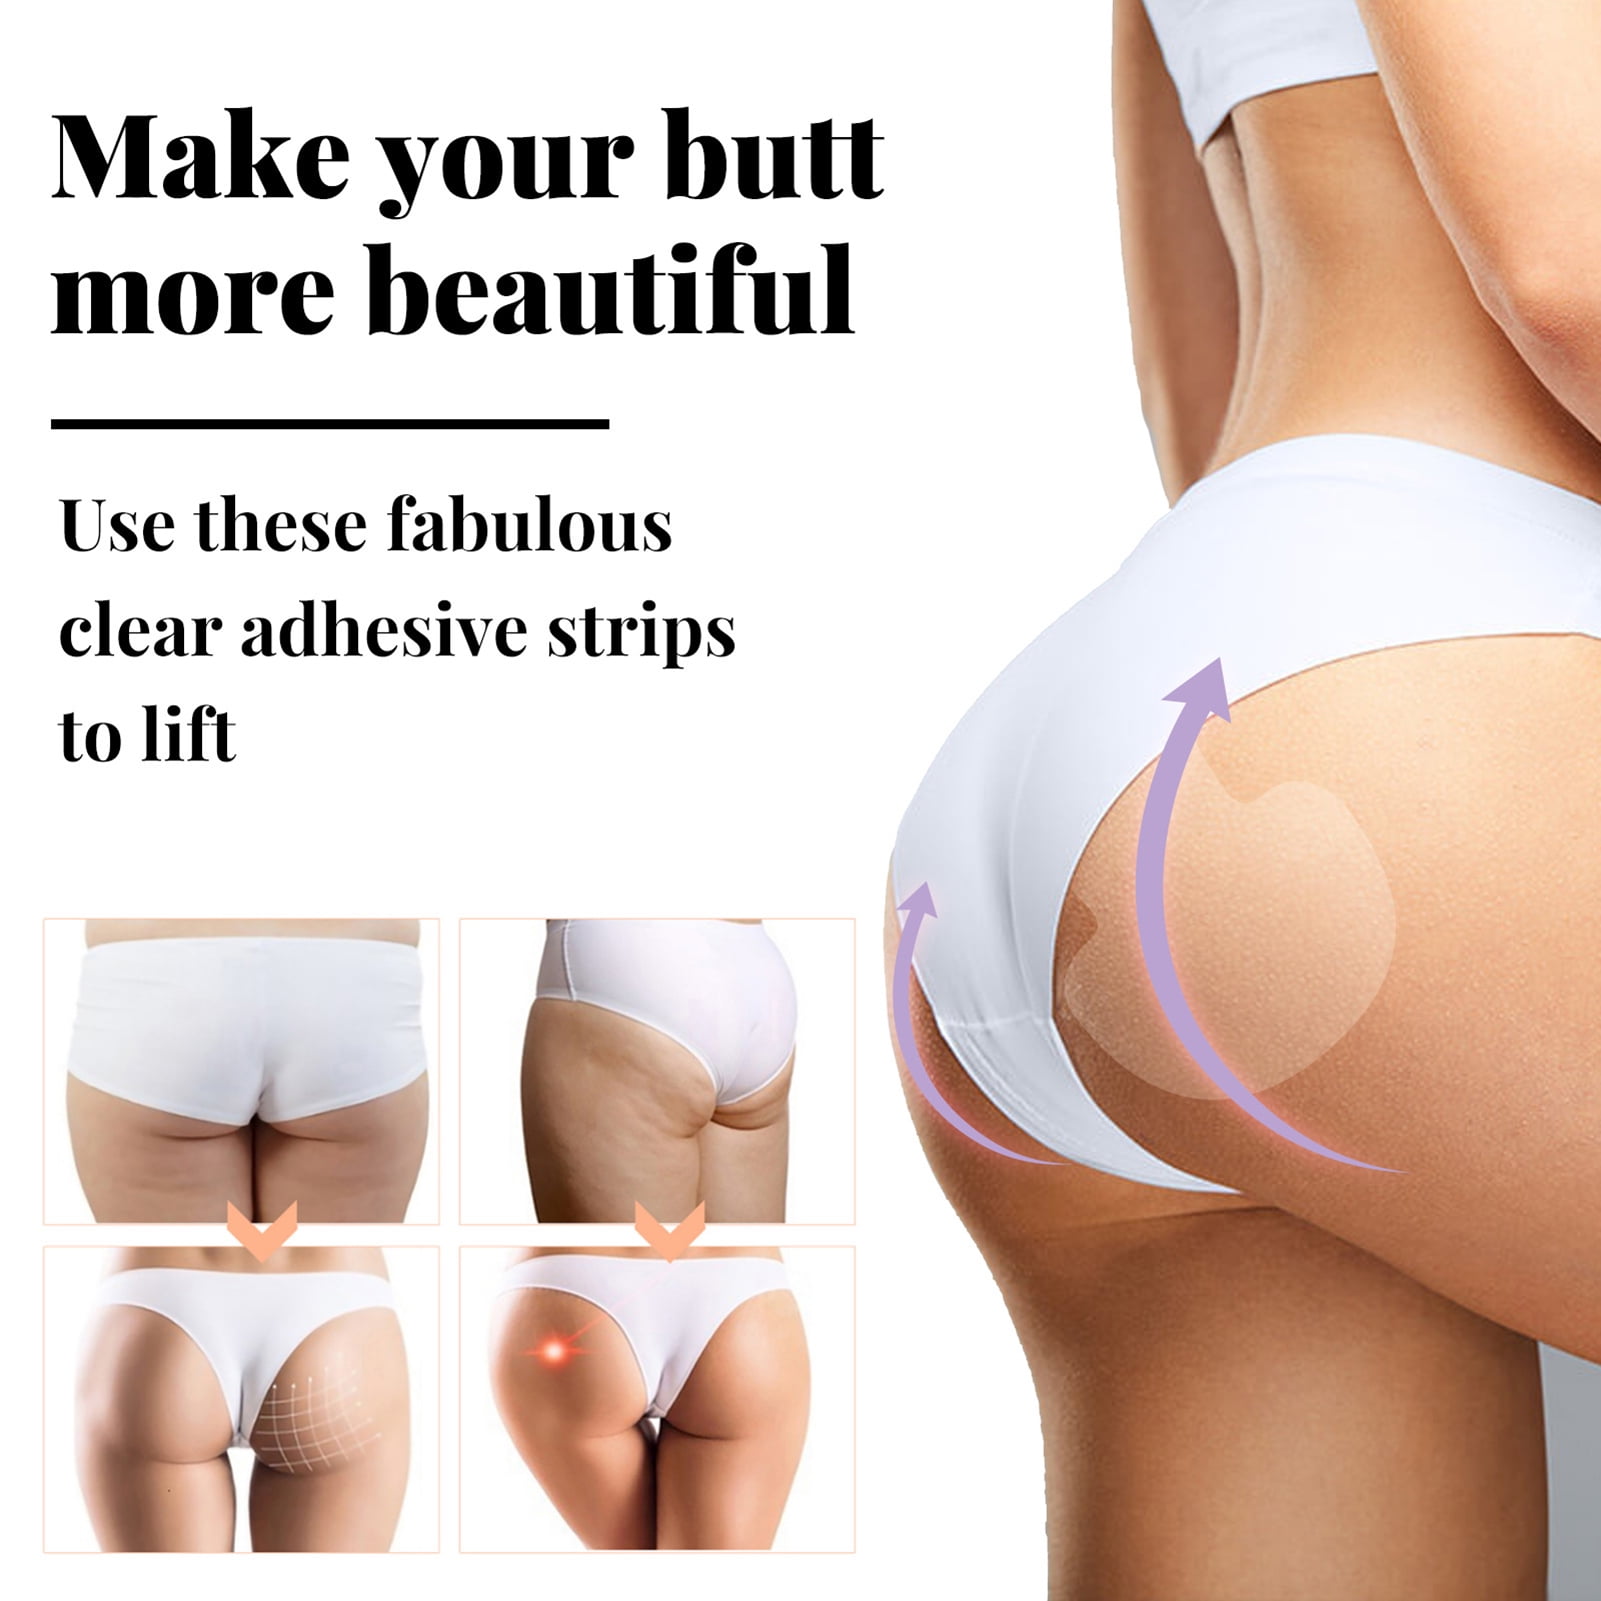 How To Lift Your Butt